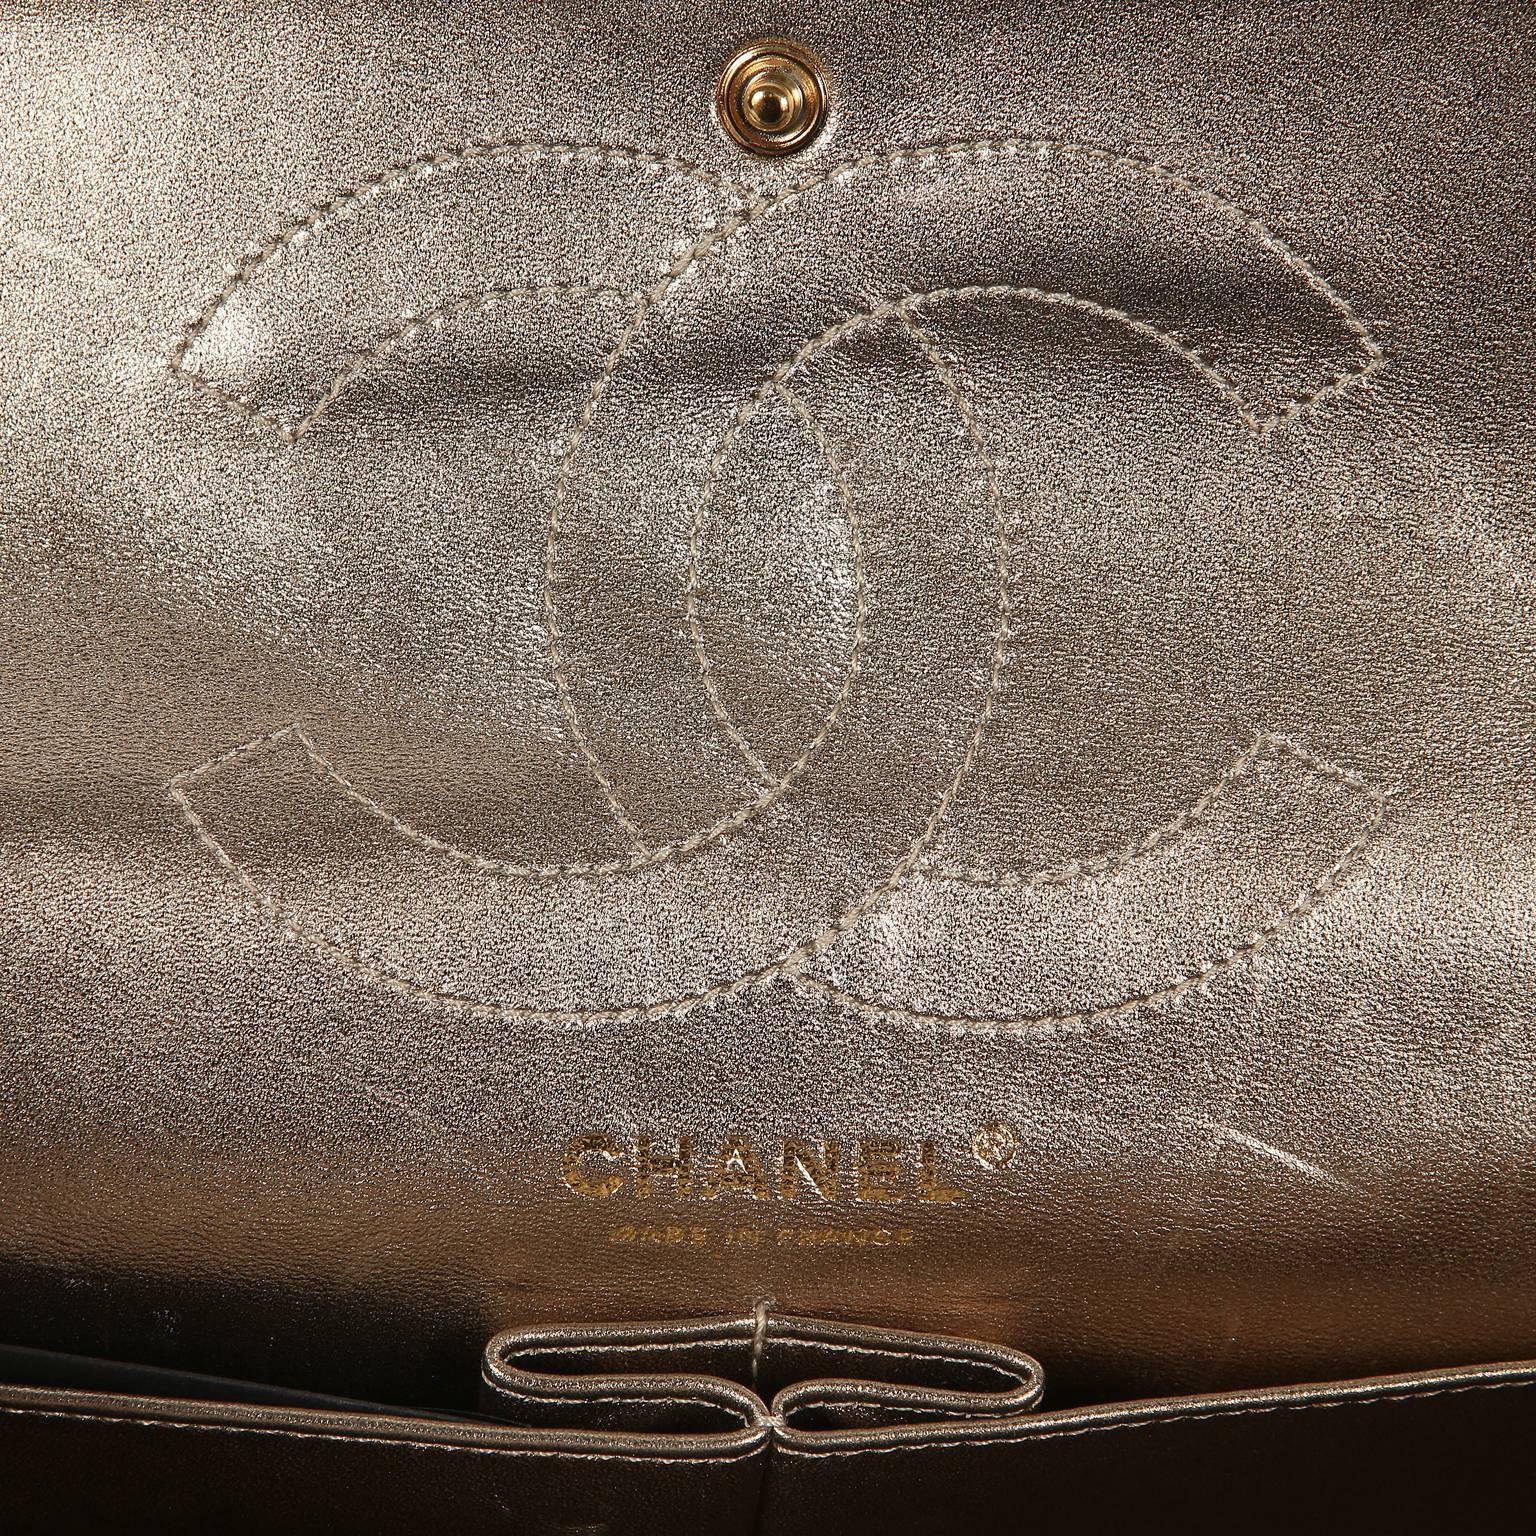 Chanel Metallic Gold Leather Reissue Flap Bag 2